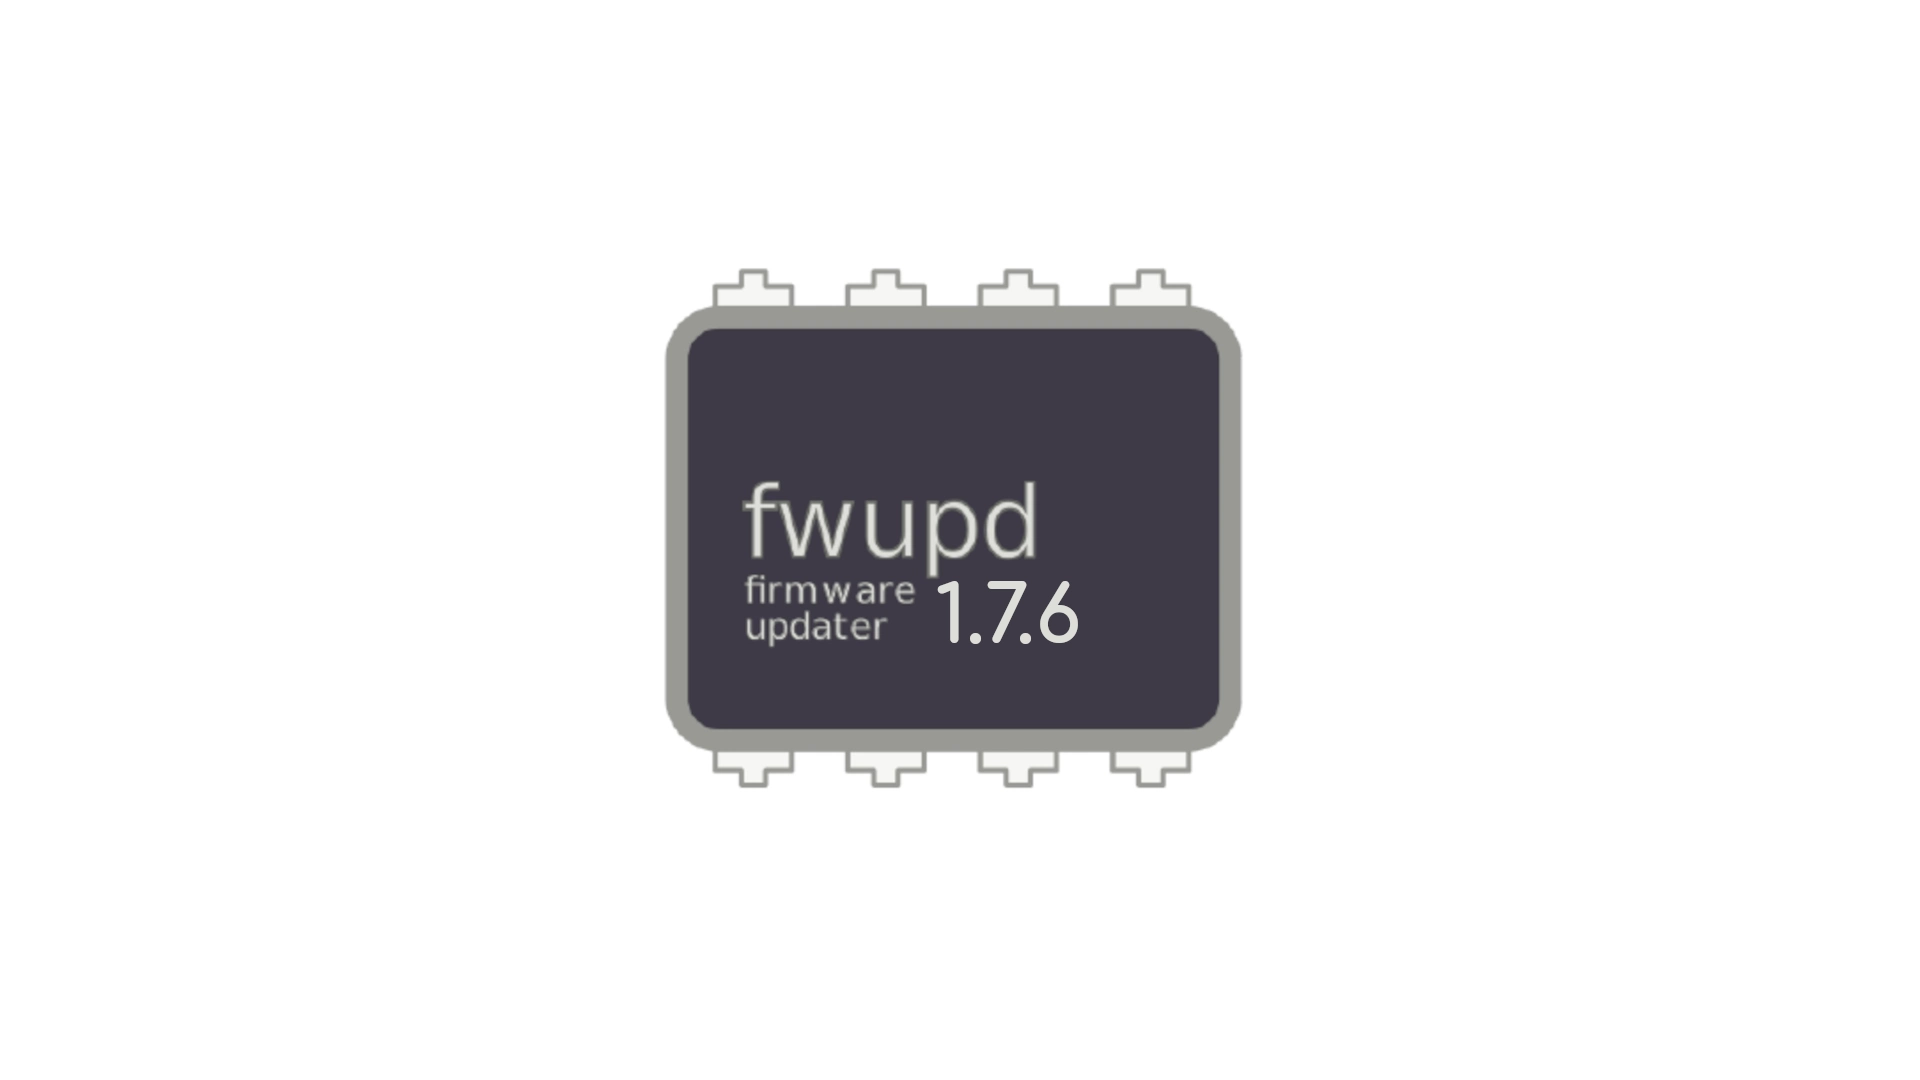 Fwupd 1.7.6 Linux Firmware Updater Adds Support for Star Lite Mk III Laptop